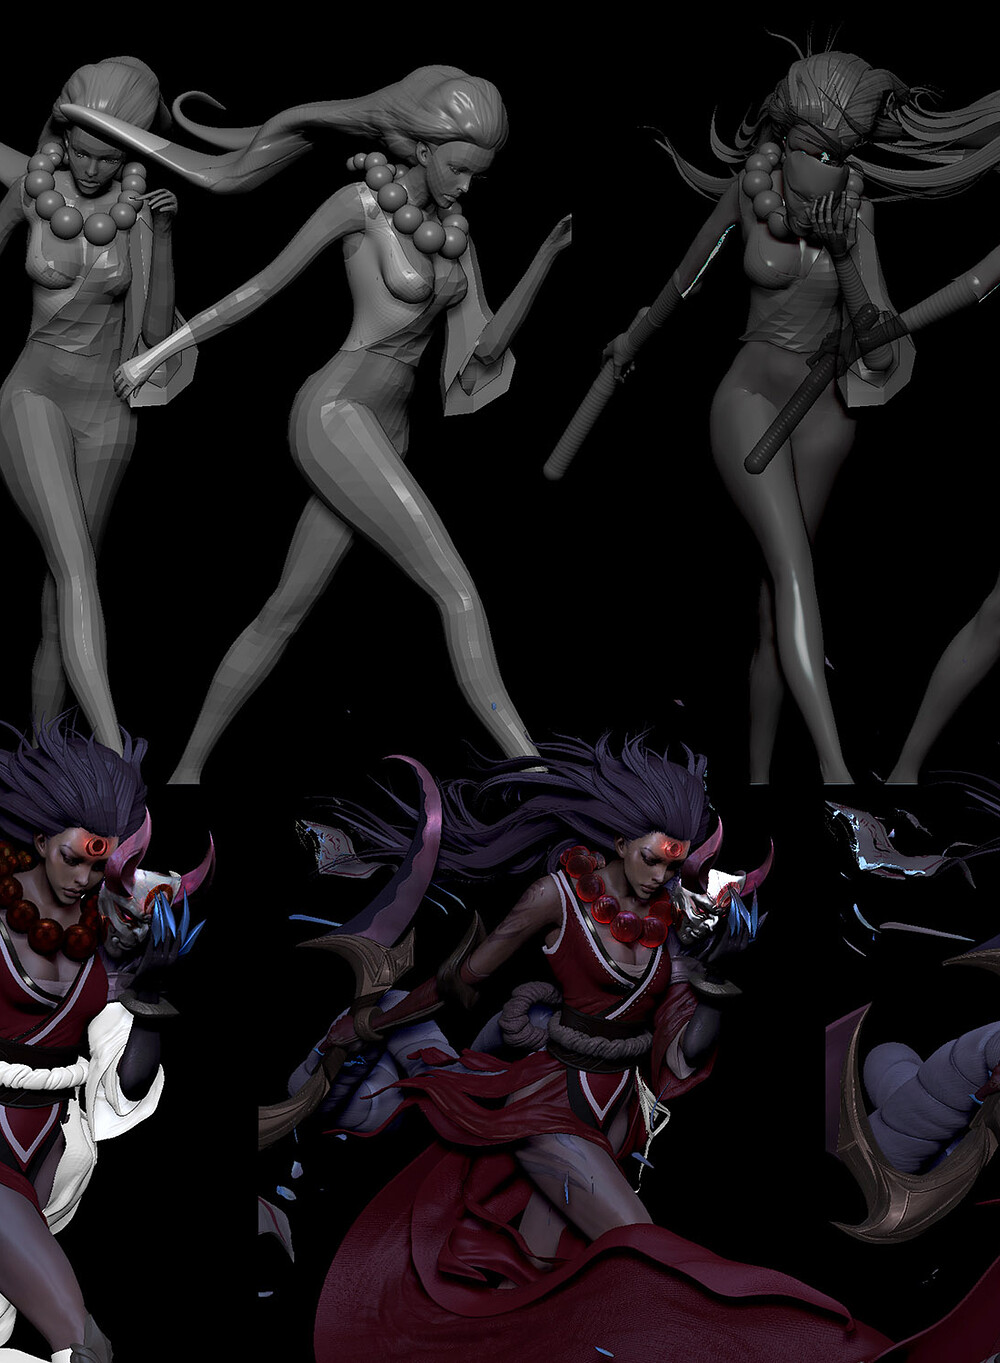 9a.Diana leage of legends  workflow in zbrush by vahid ahmadi.jpg